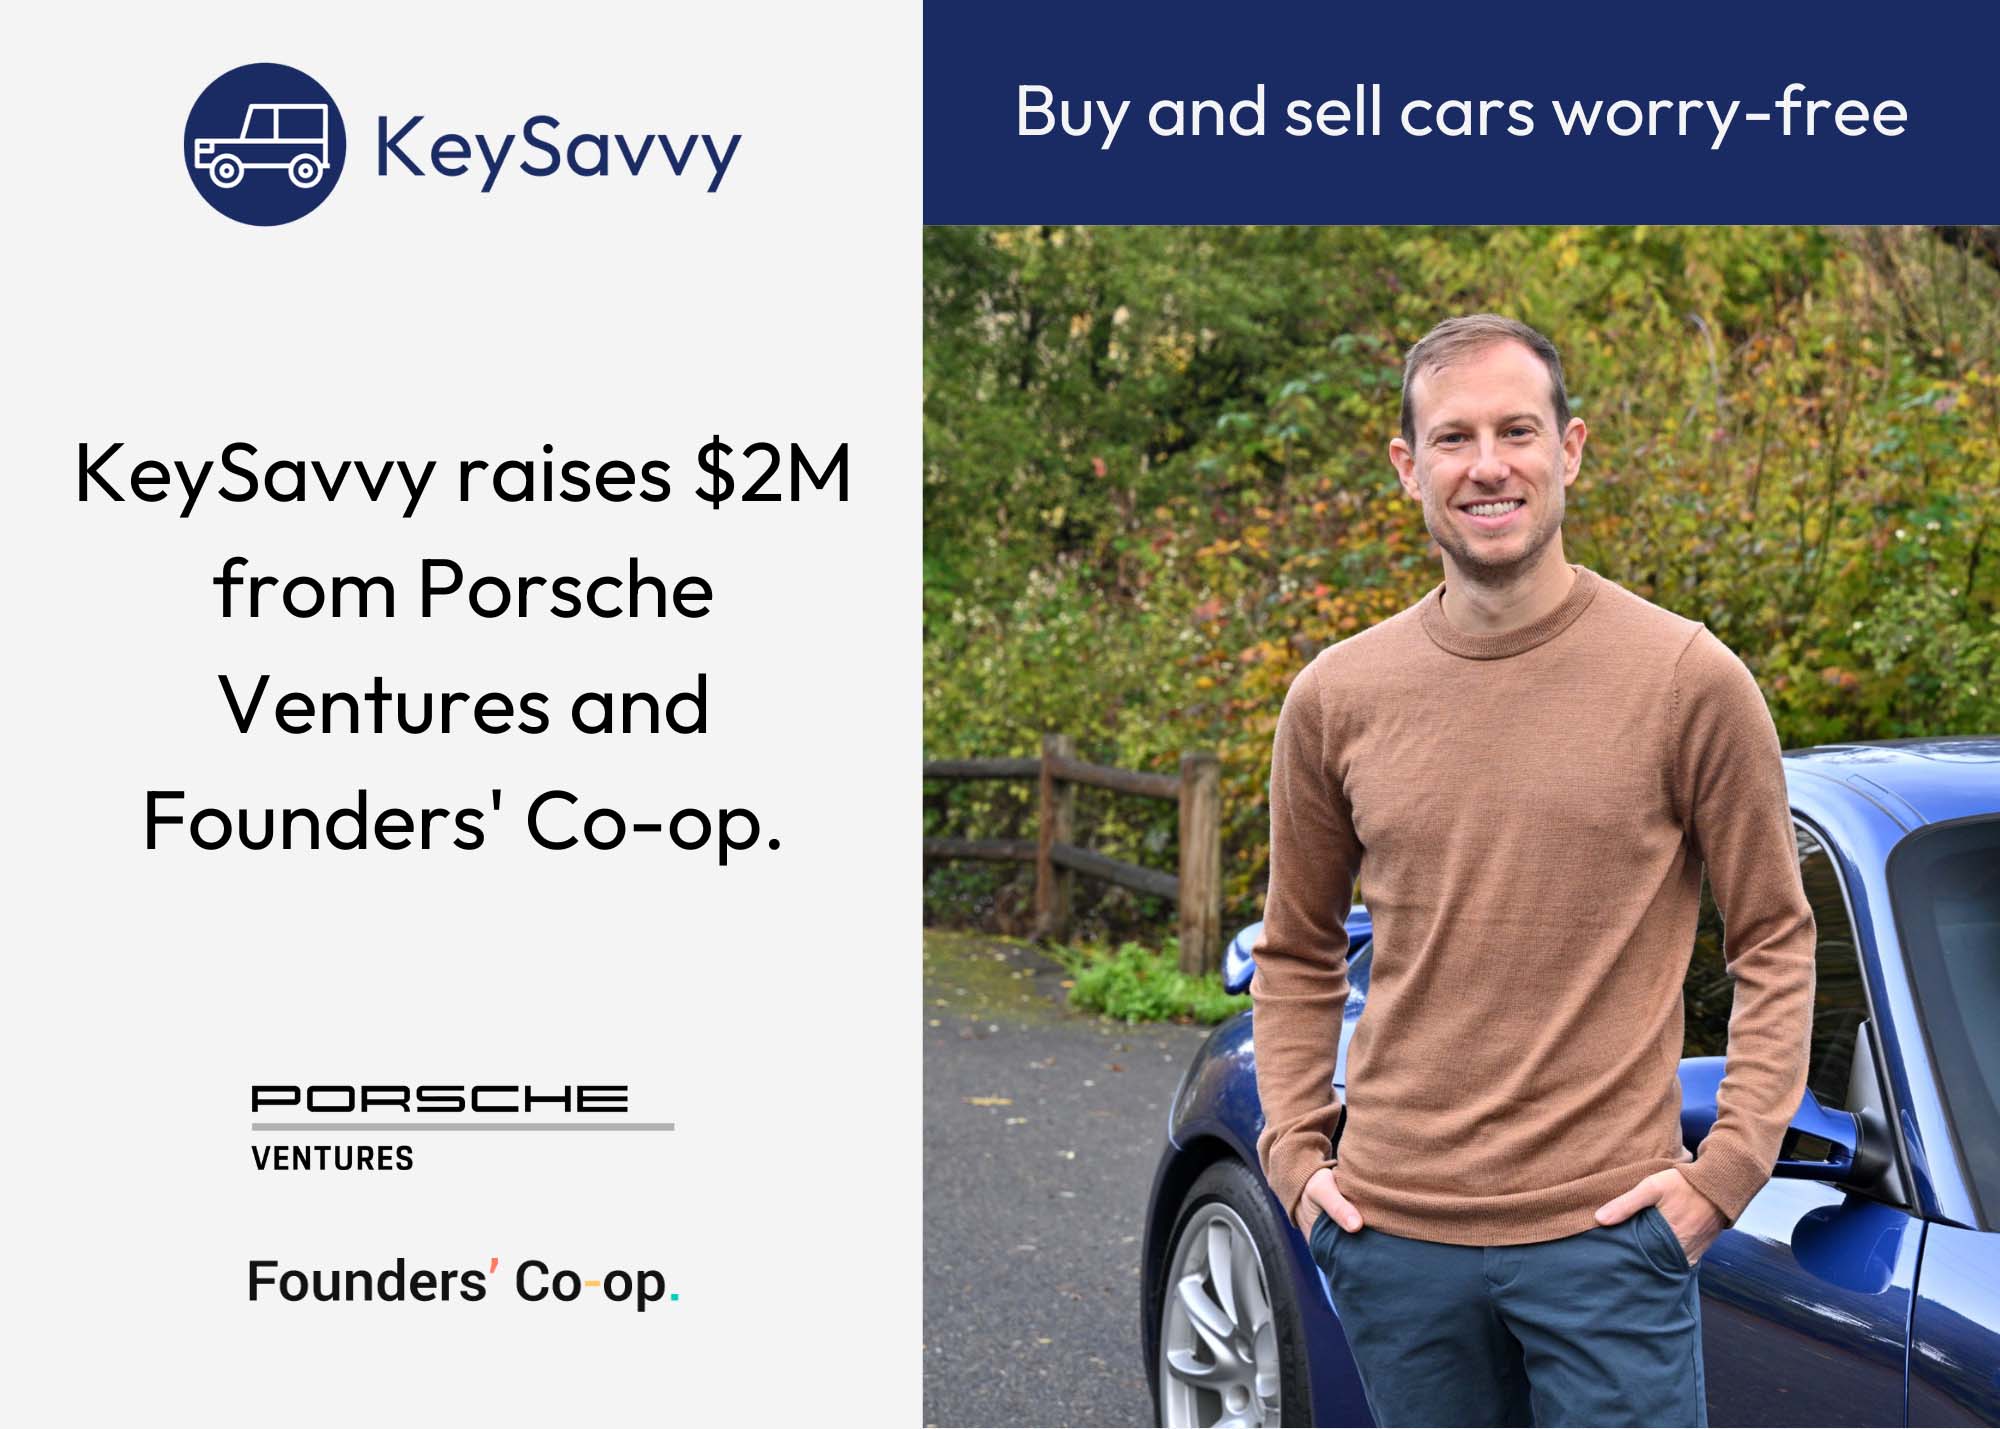 KeySavvy raises $2M from Porsche Ventures and Founders' Co-op.